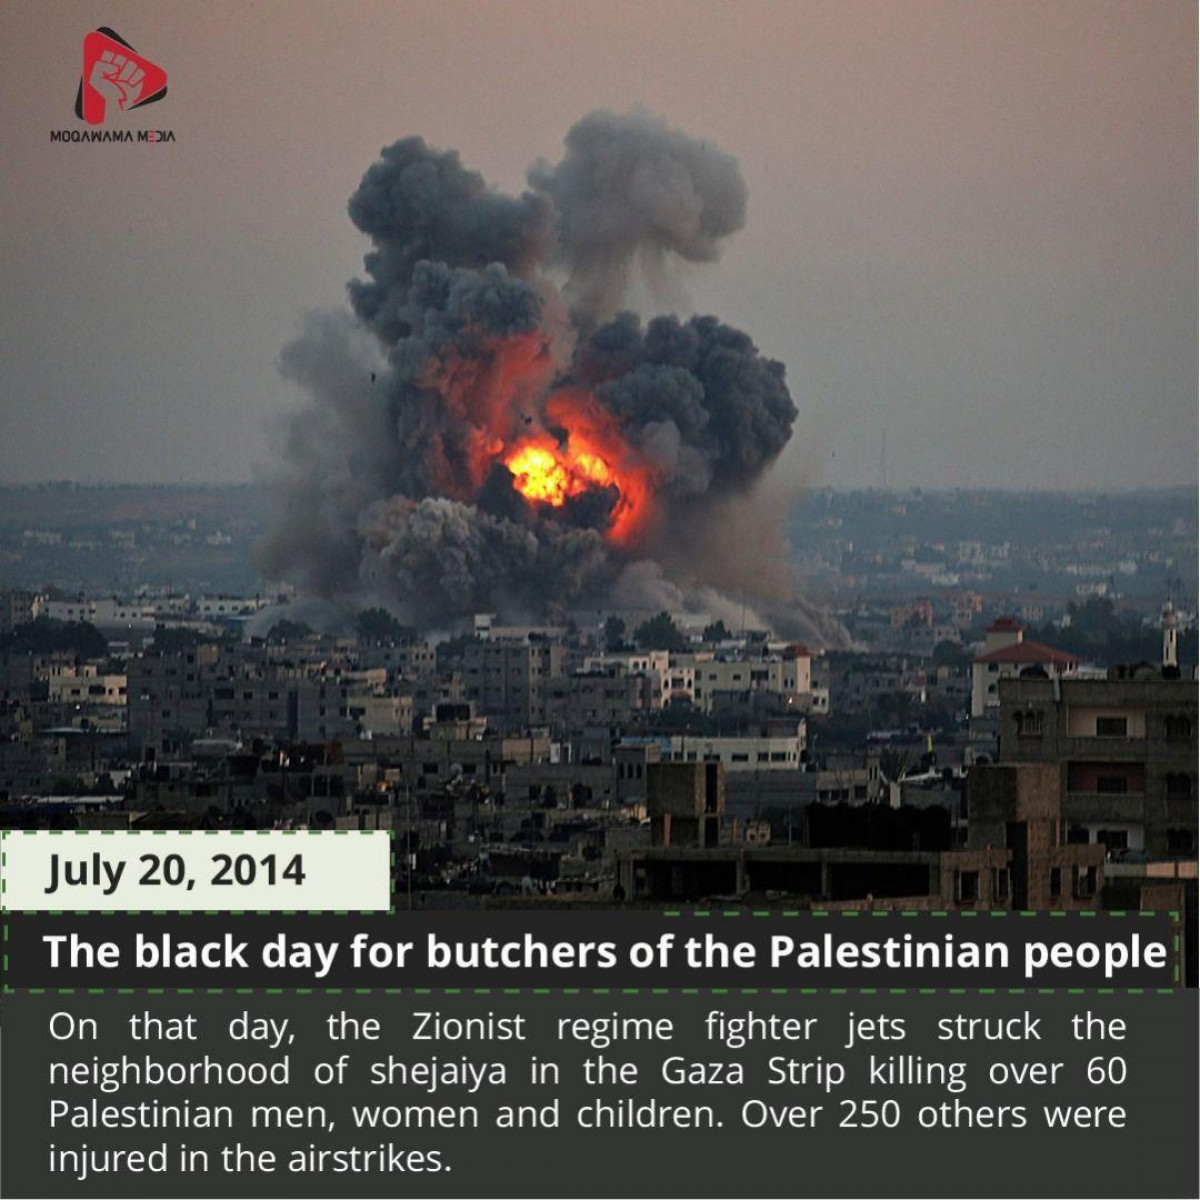 The black day for butchers of the Palestinian people